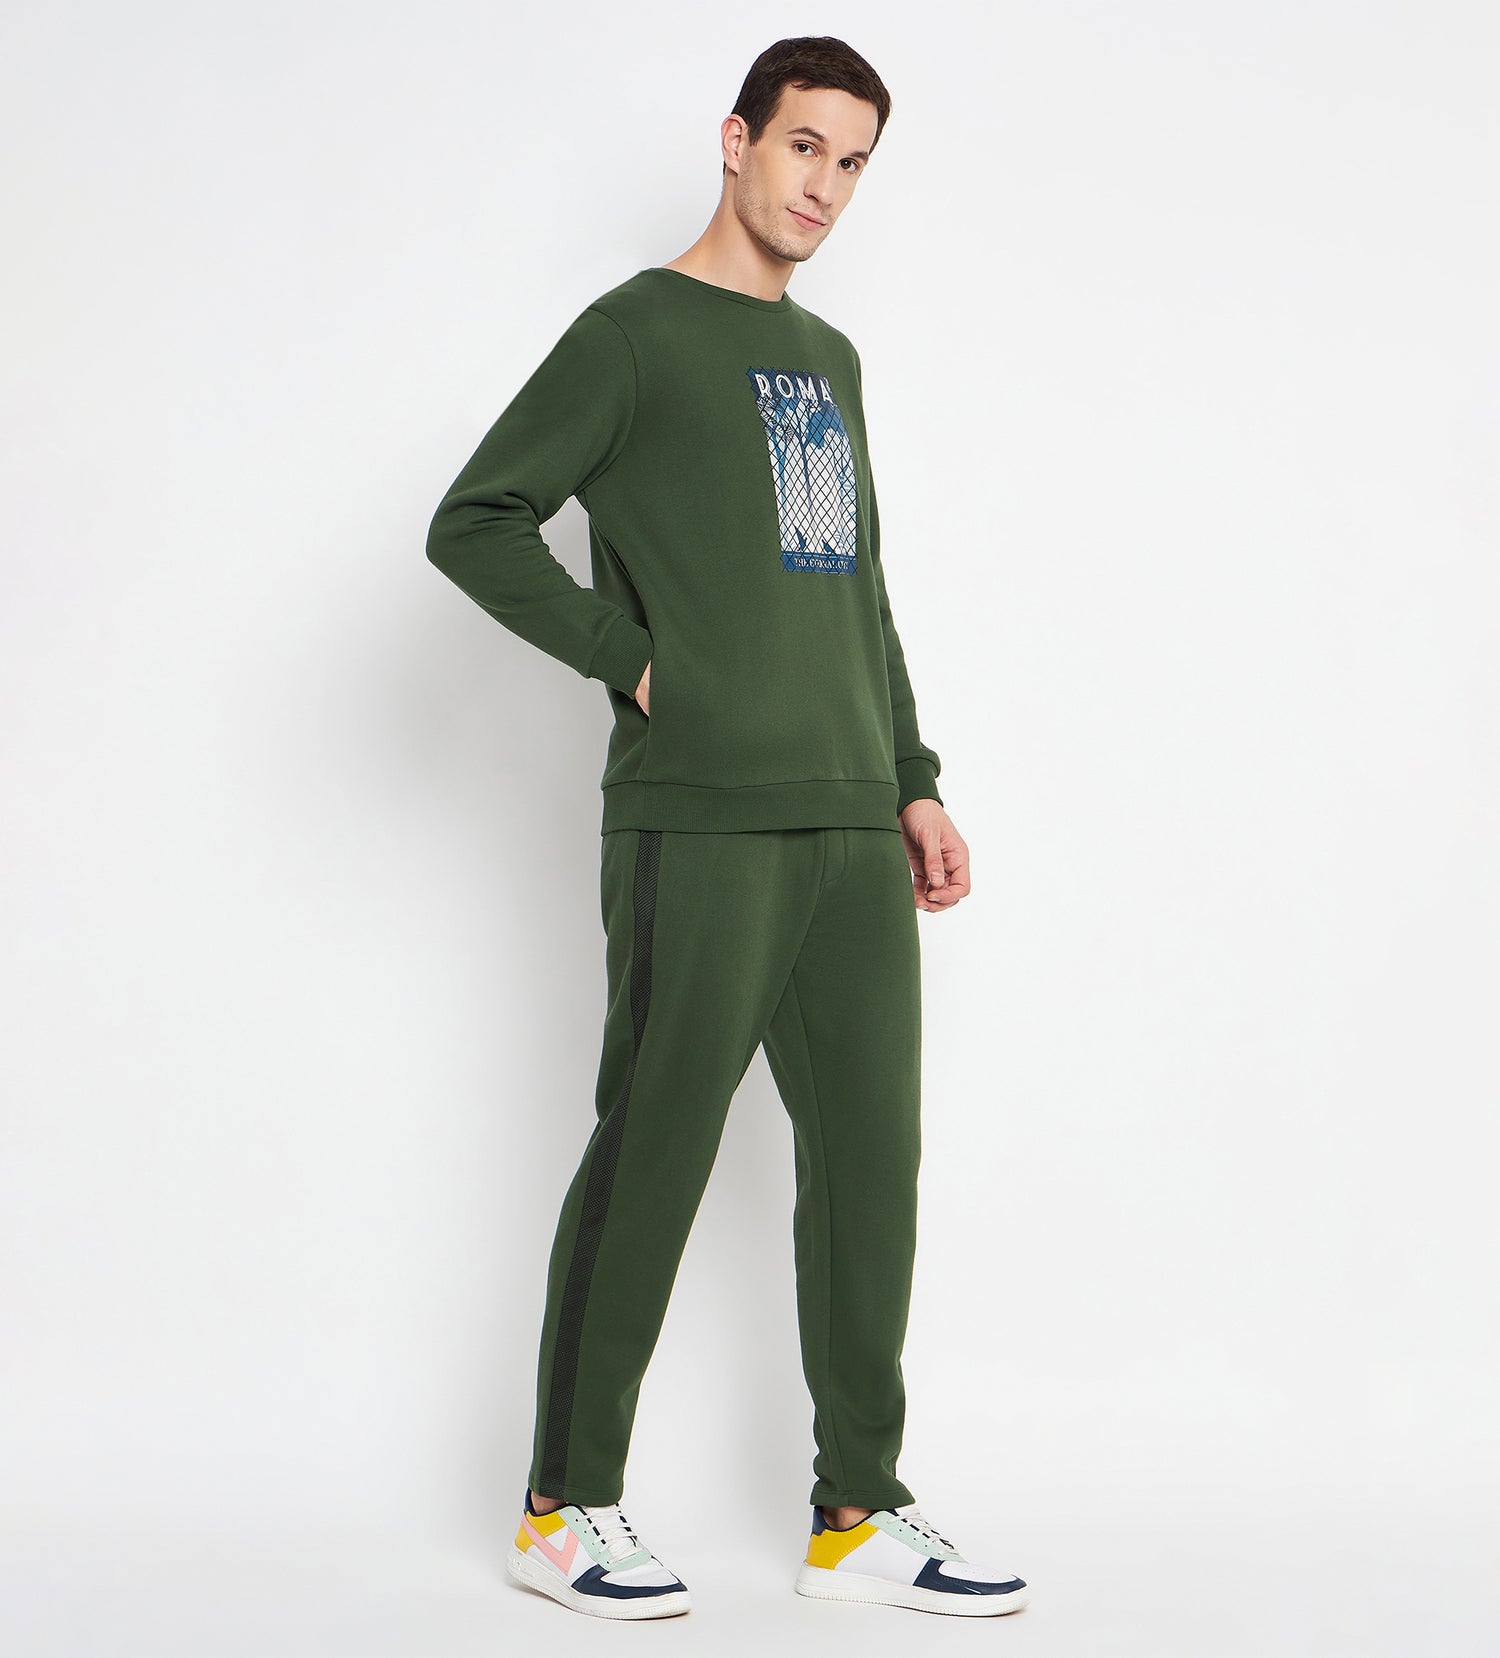 Rome-Inspired Olive Tracksuit with Digital &amp; Emboss Detailing